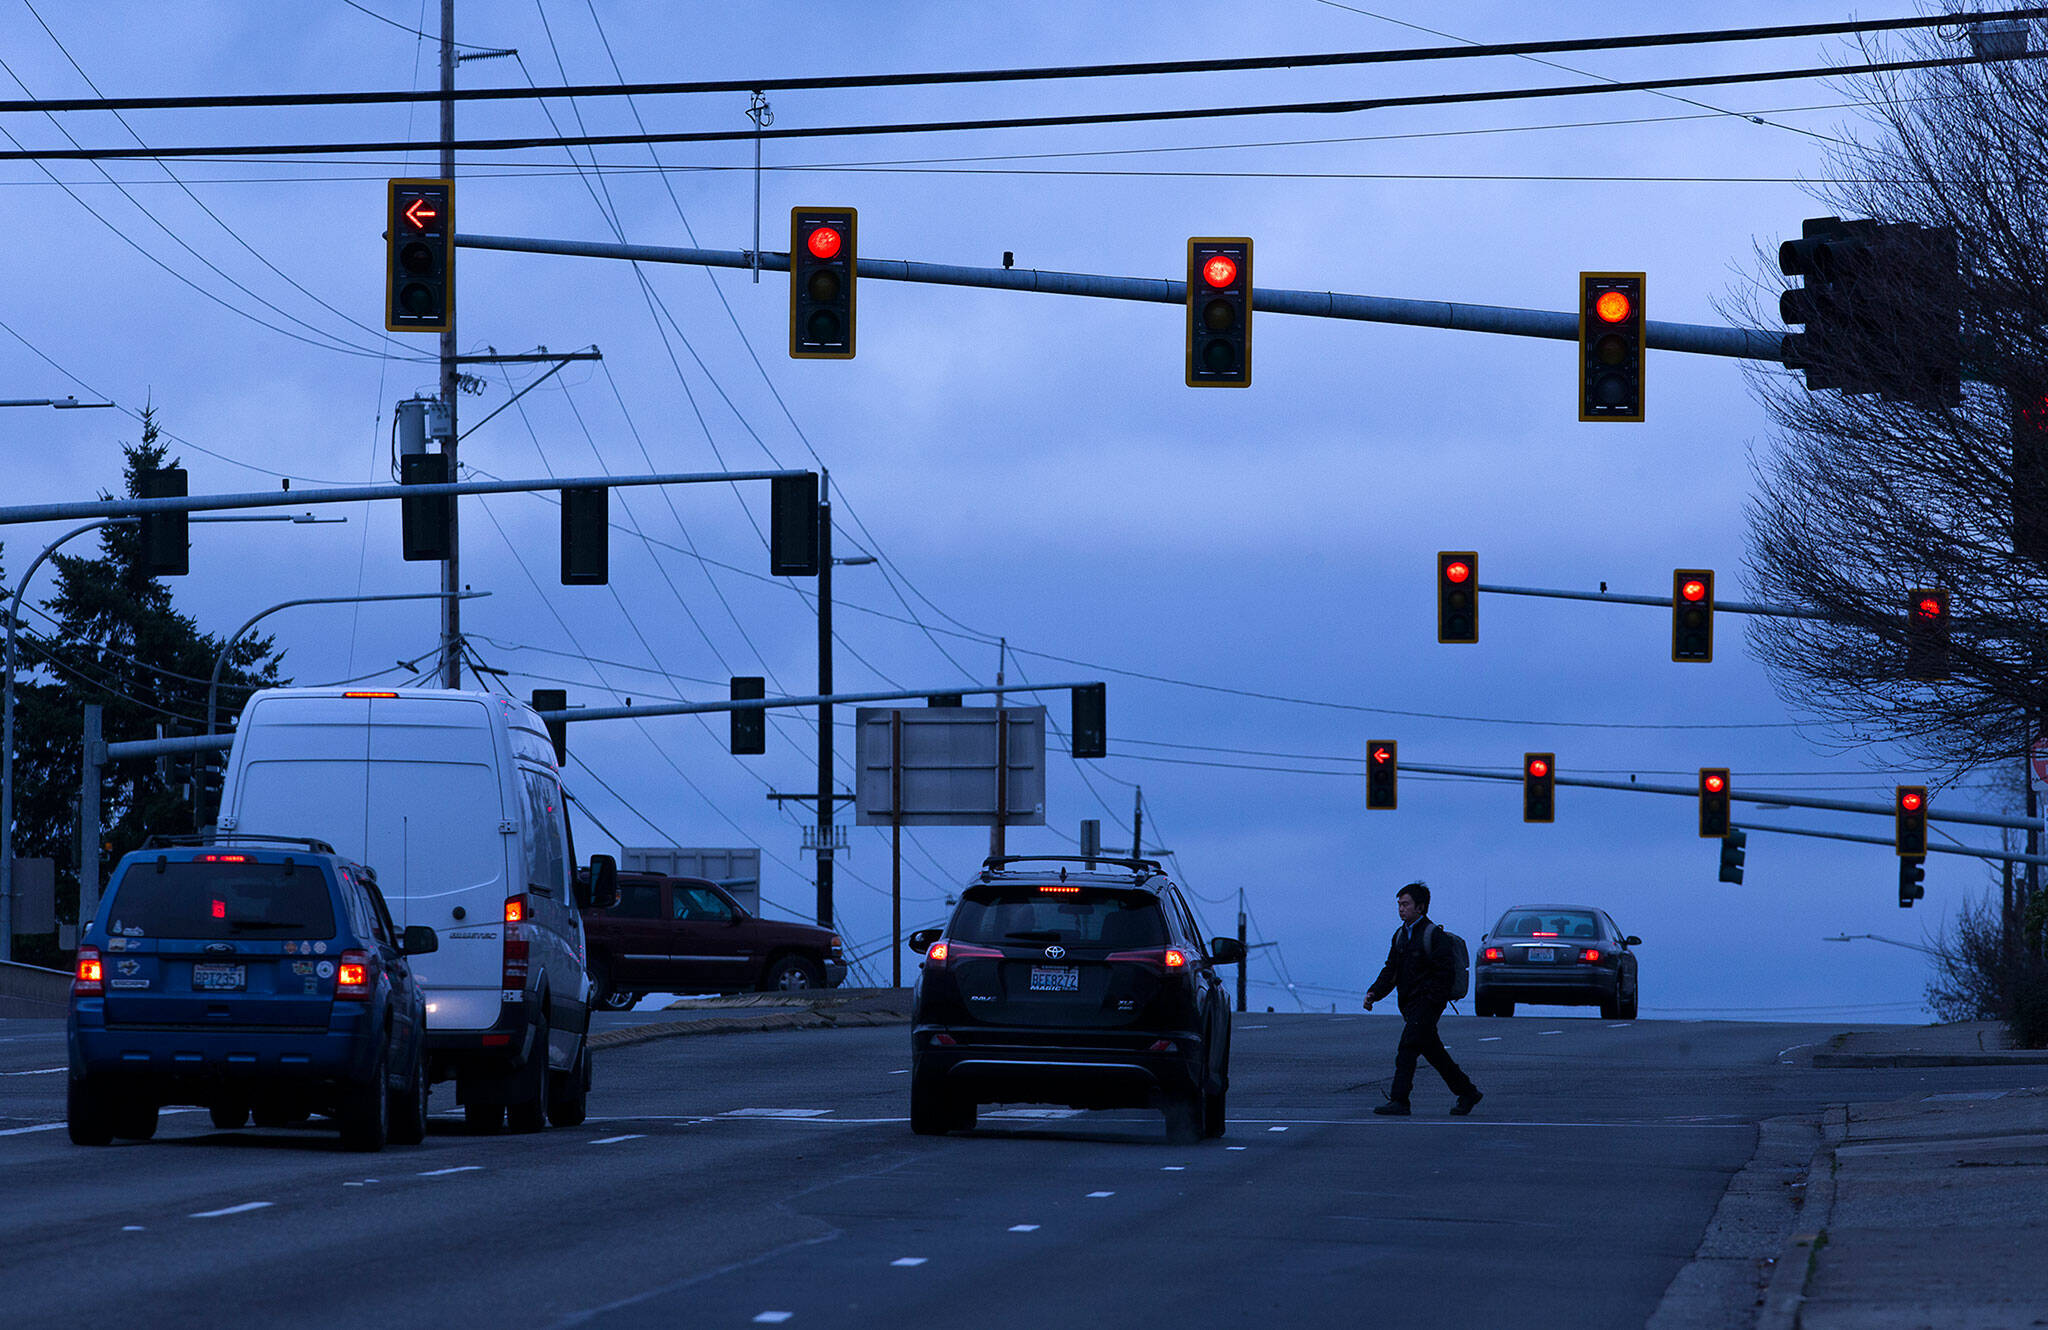 A pedestrian crosses the street under stoplights at Casino Road and Evergreen Way, in December 2019 in Everett. The intersection at Casino Road and Evergreen Way is one of seven locations being considered for red-light traffic cameras, which would issue $124 fines. (Andy Bronson / Herald file photo)